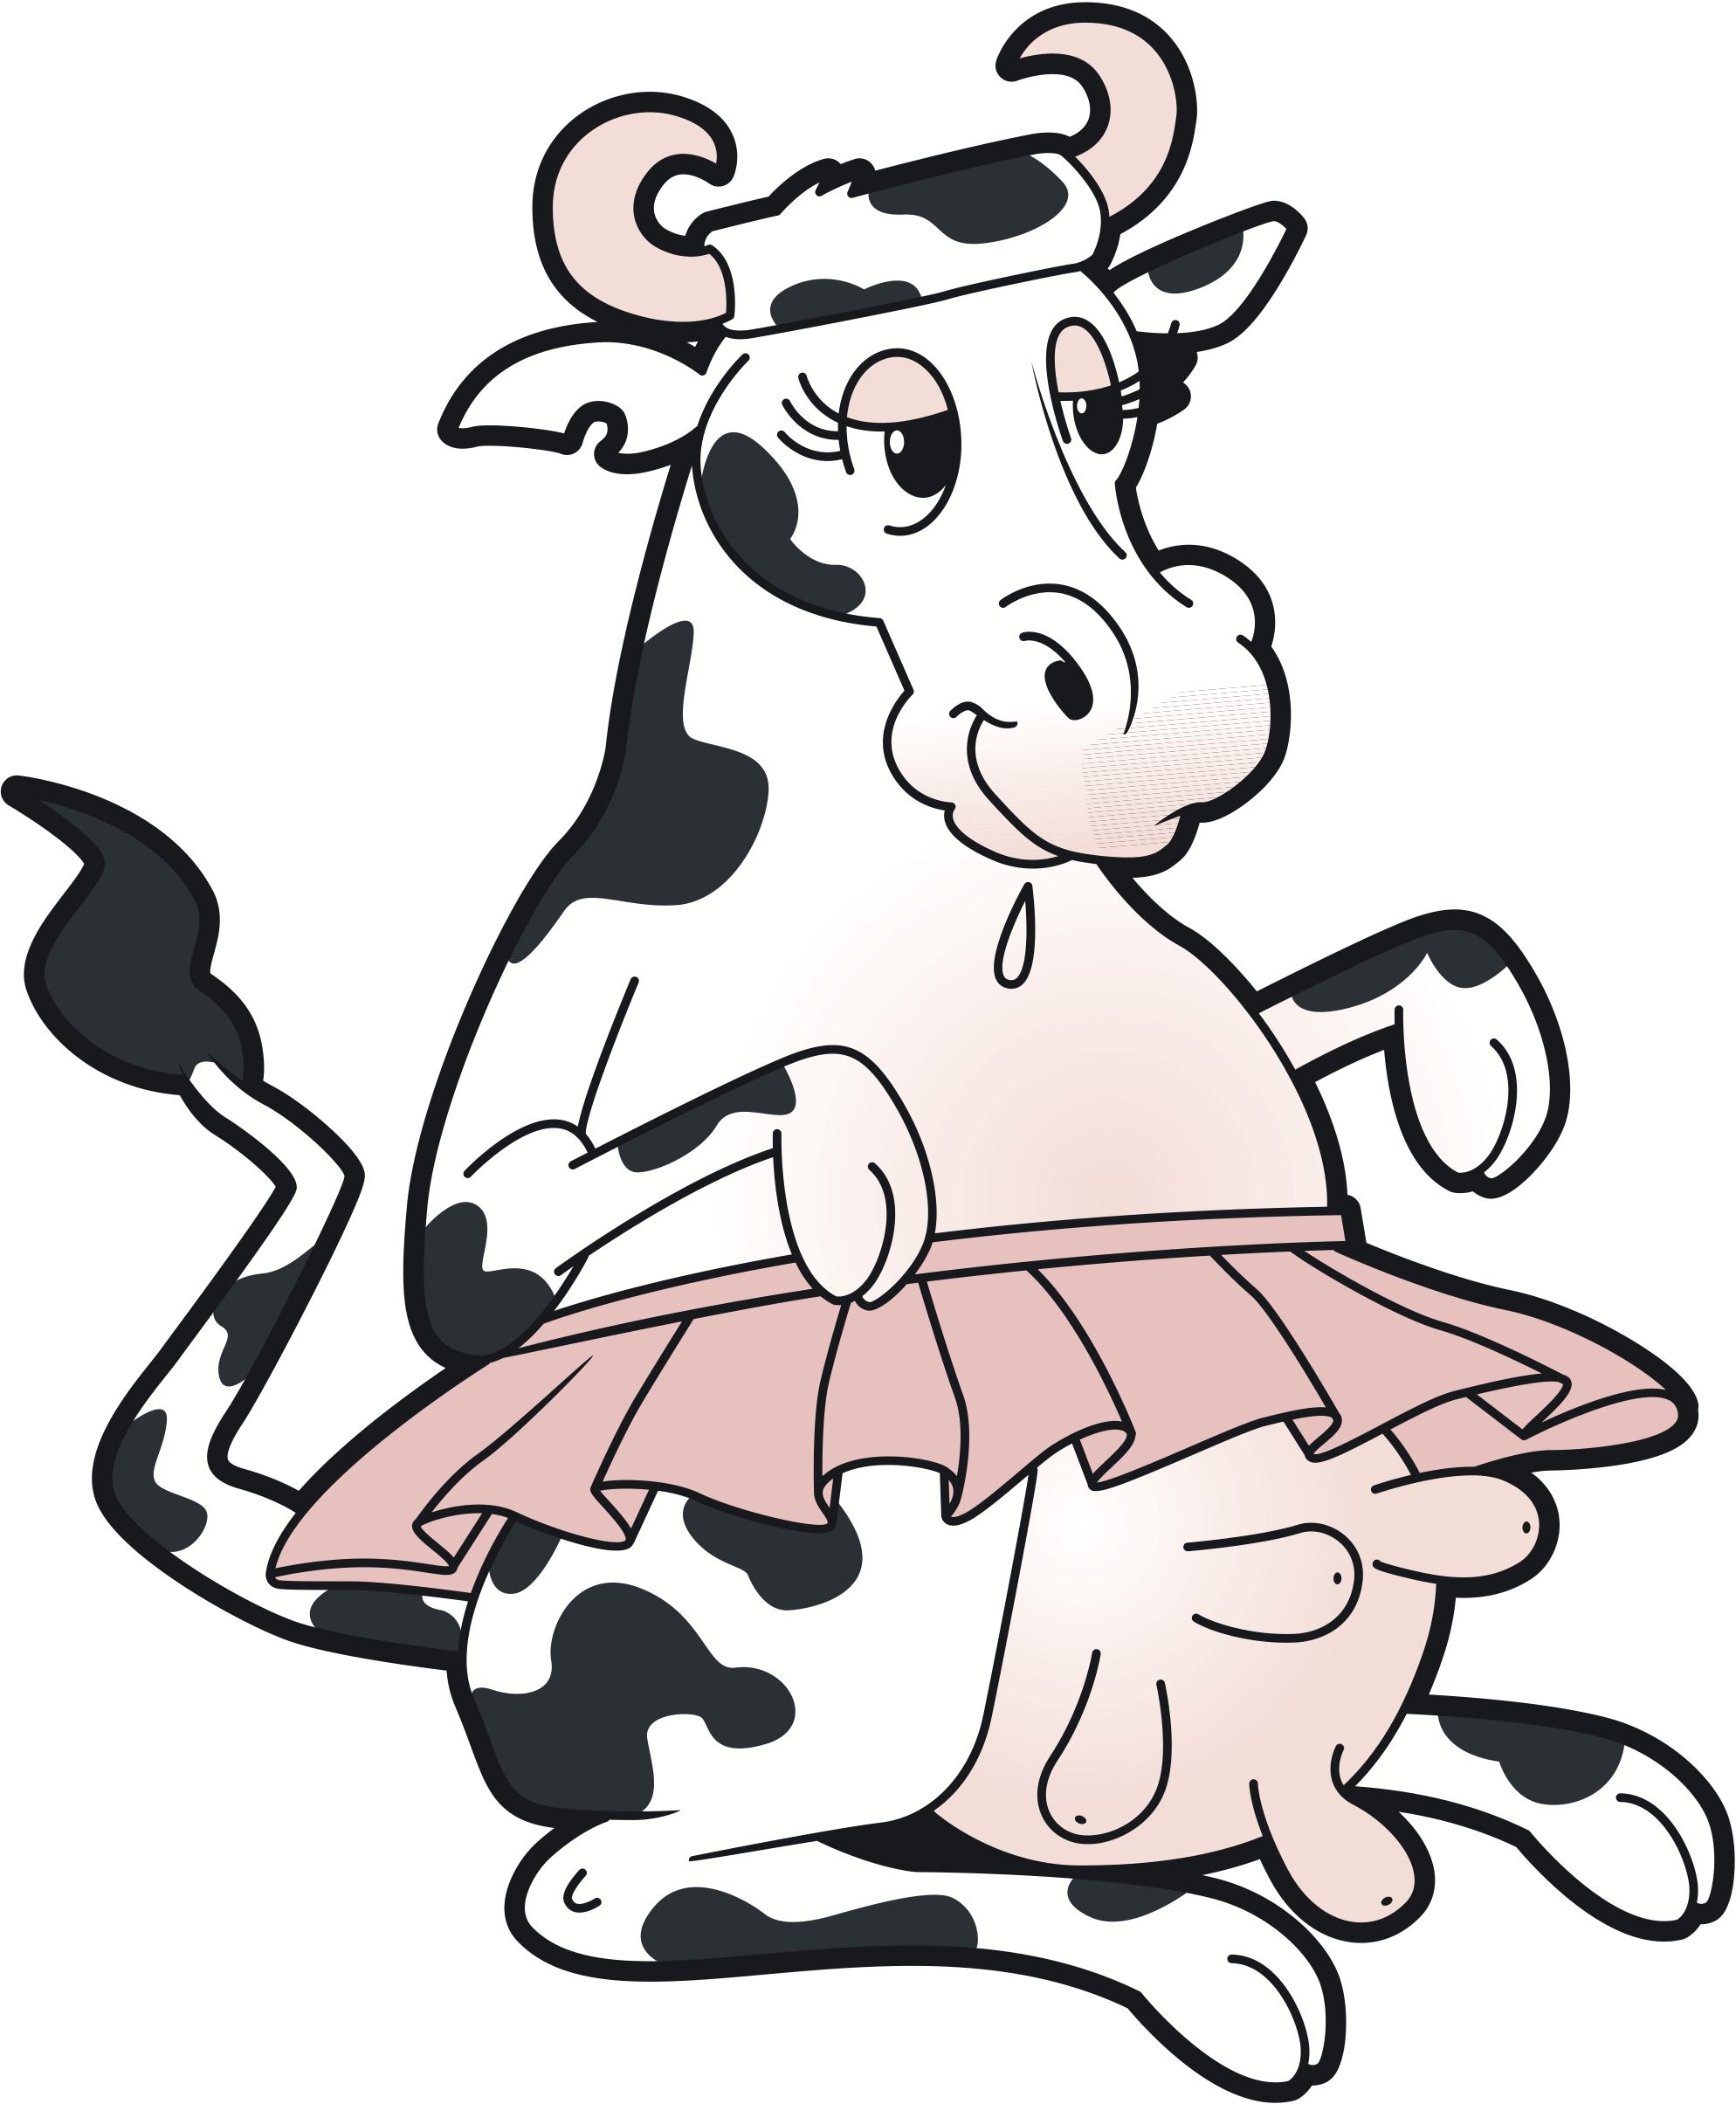 Cow animated clipart free